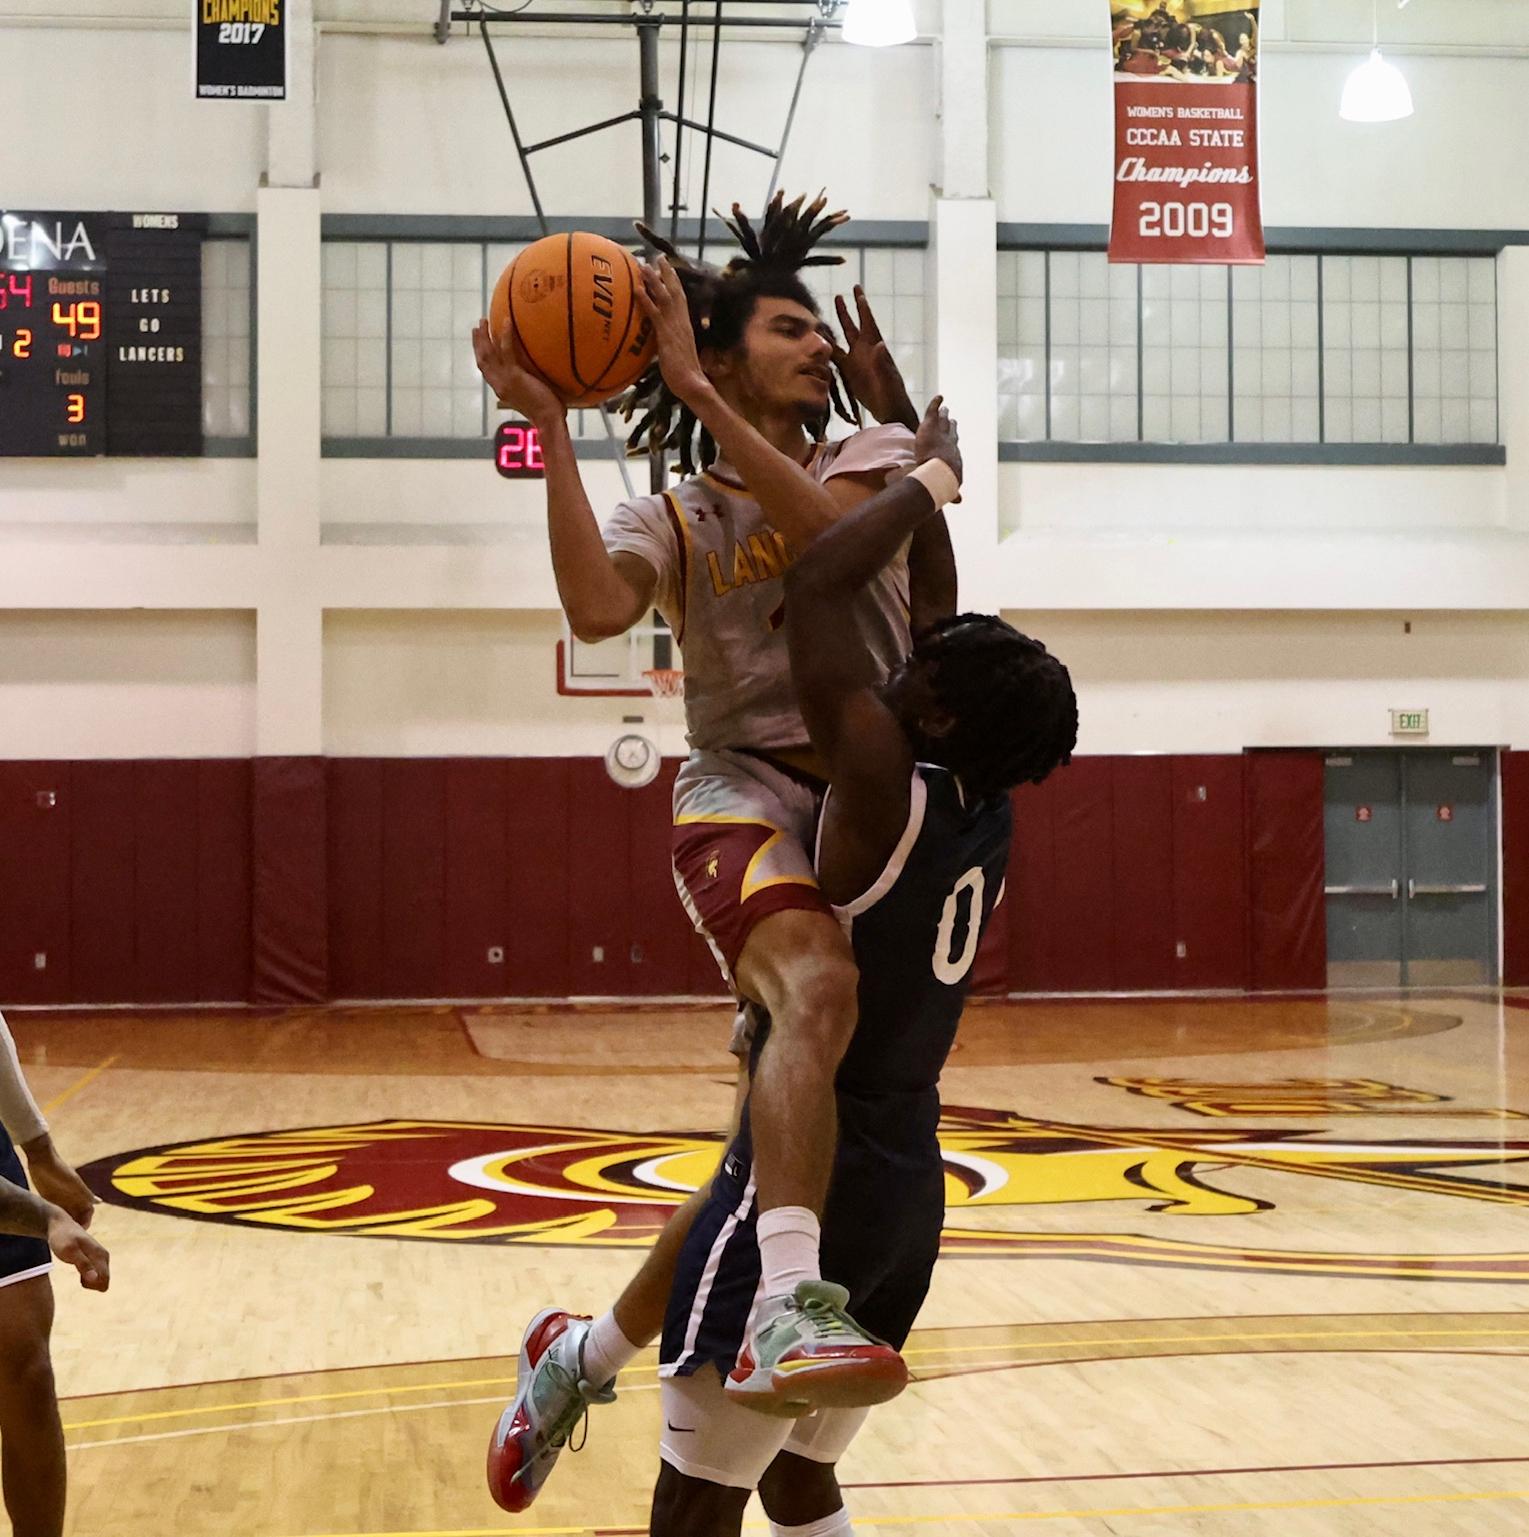 Jayden Winfrey in a recent home game. He scored 17 points on Monday v. Cerritos.